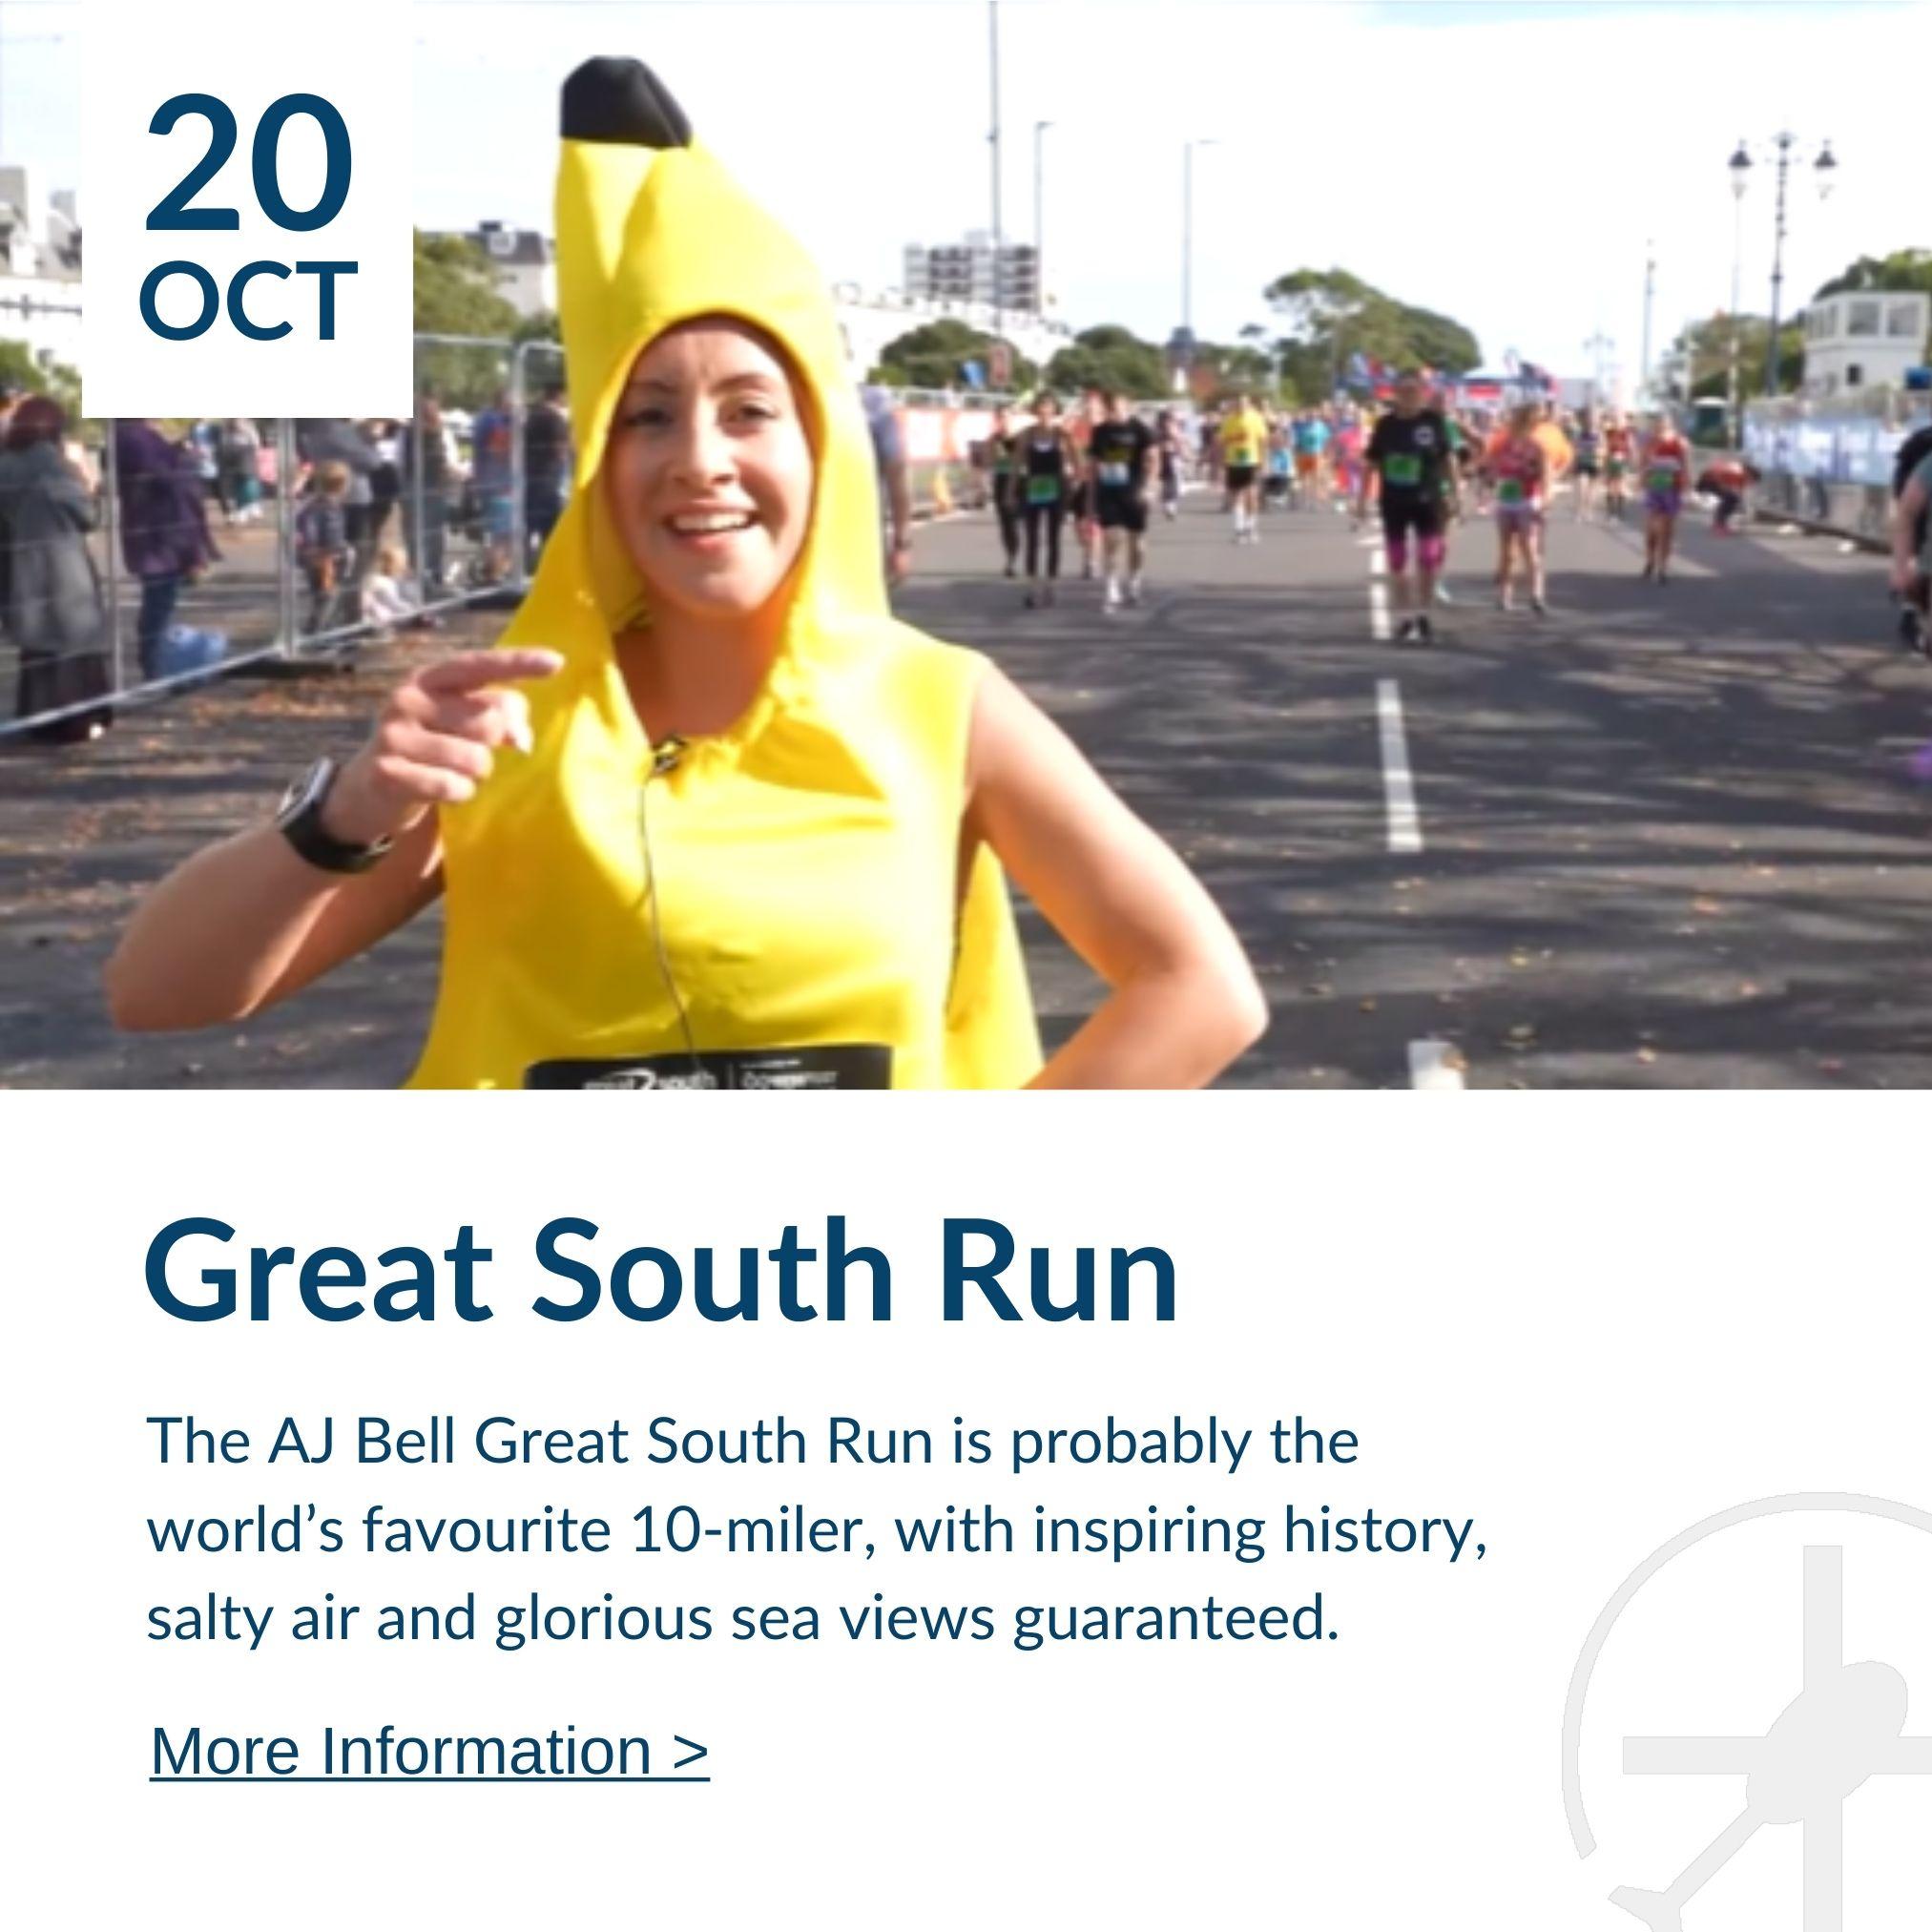 Events - Great South Run